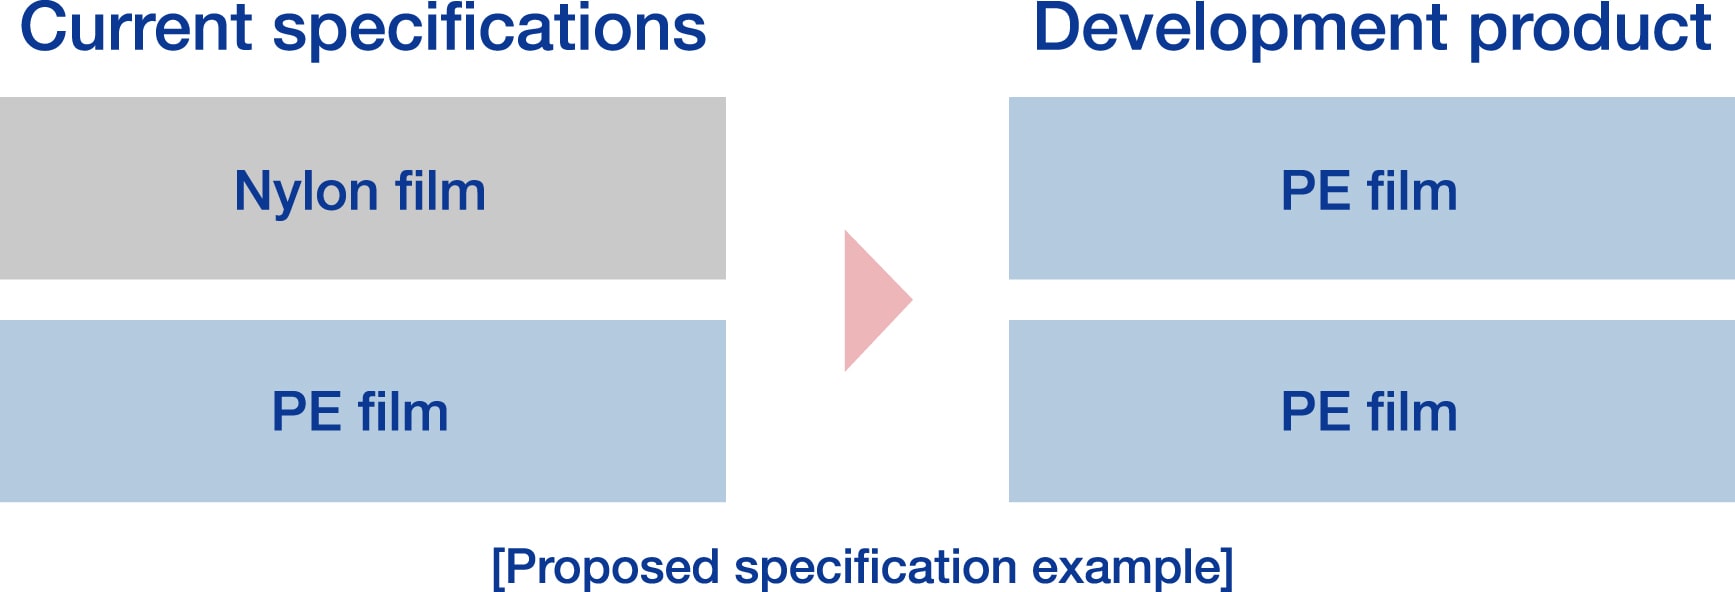 Proposed specification example_PE